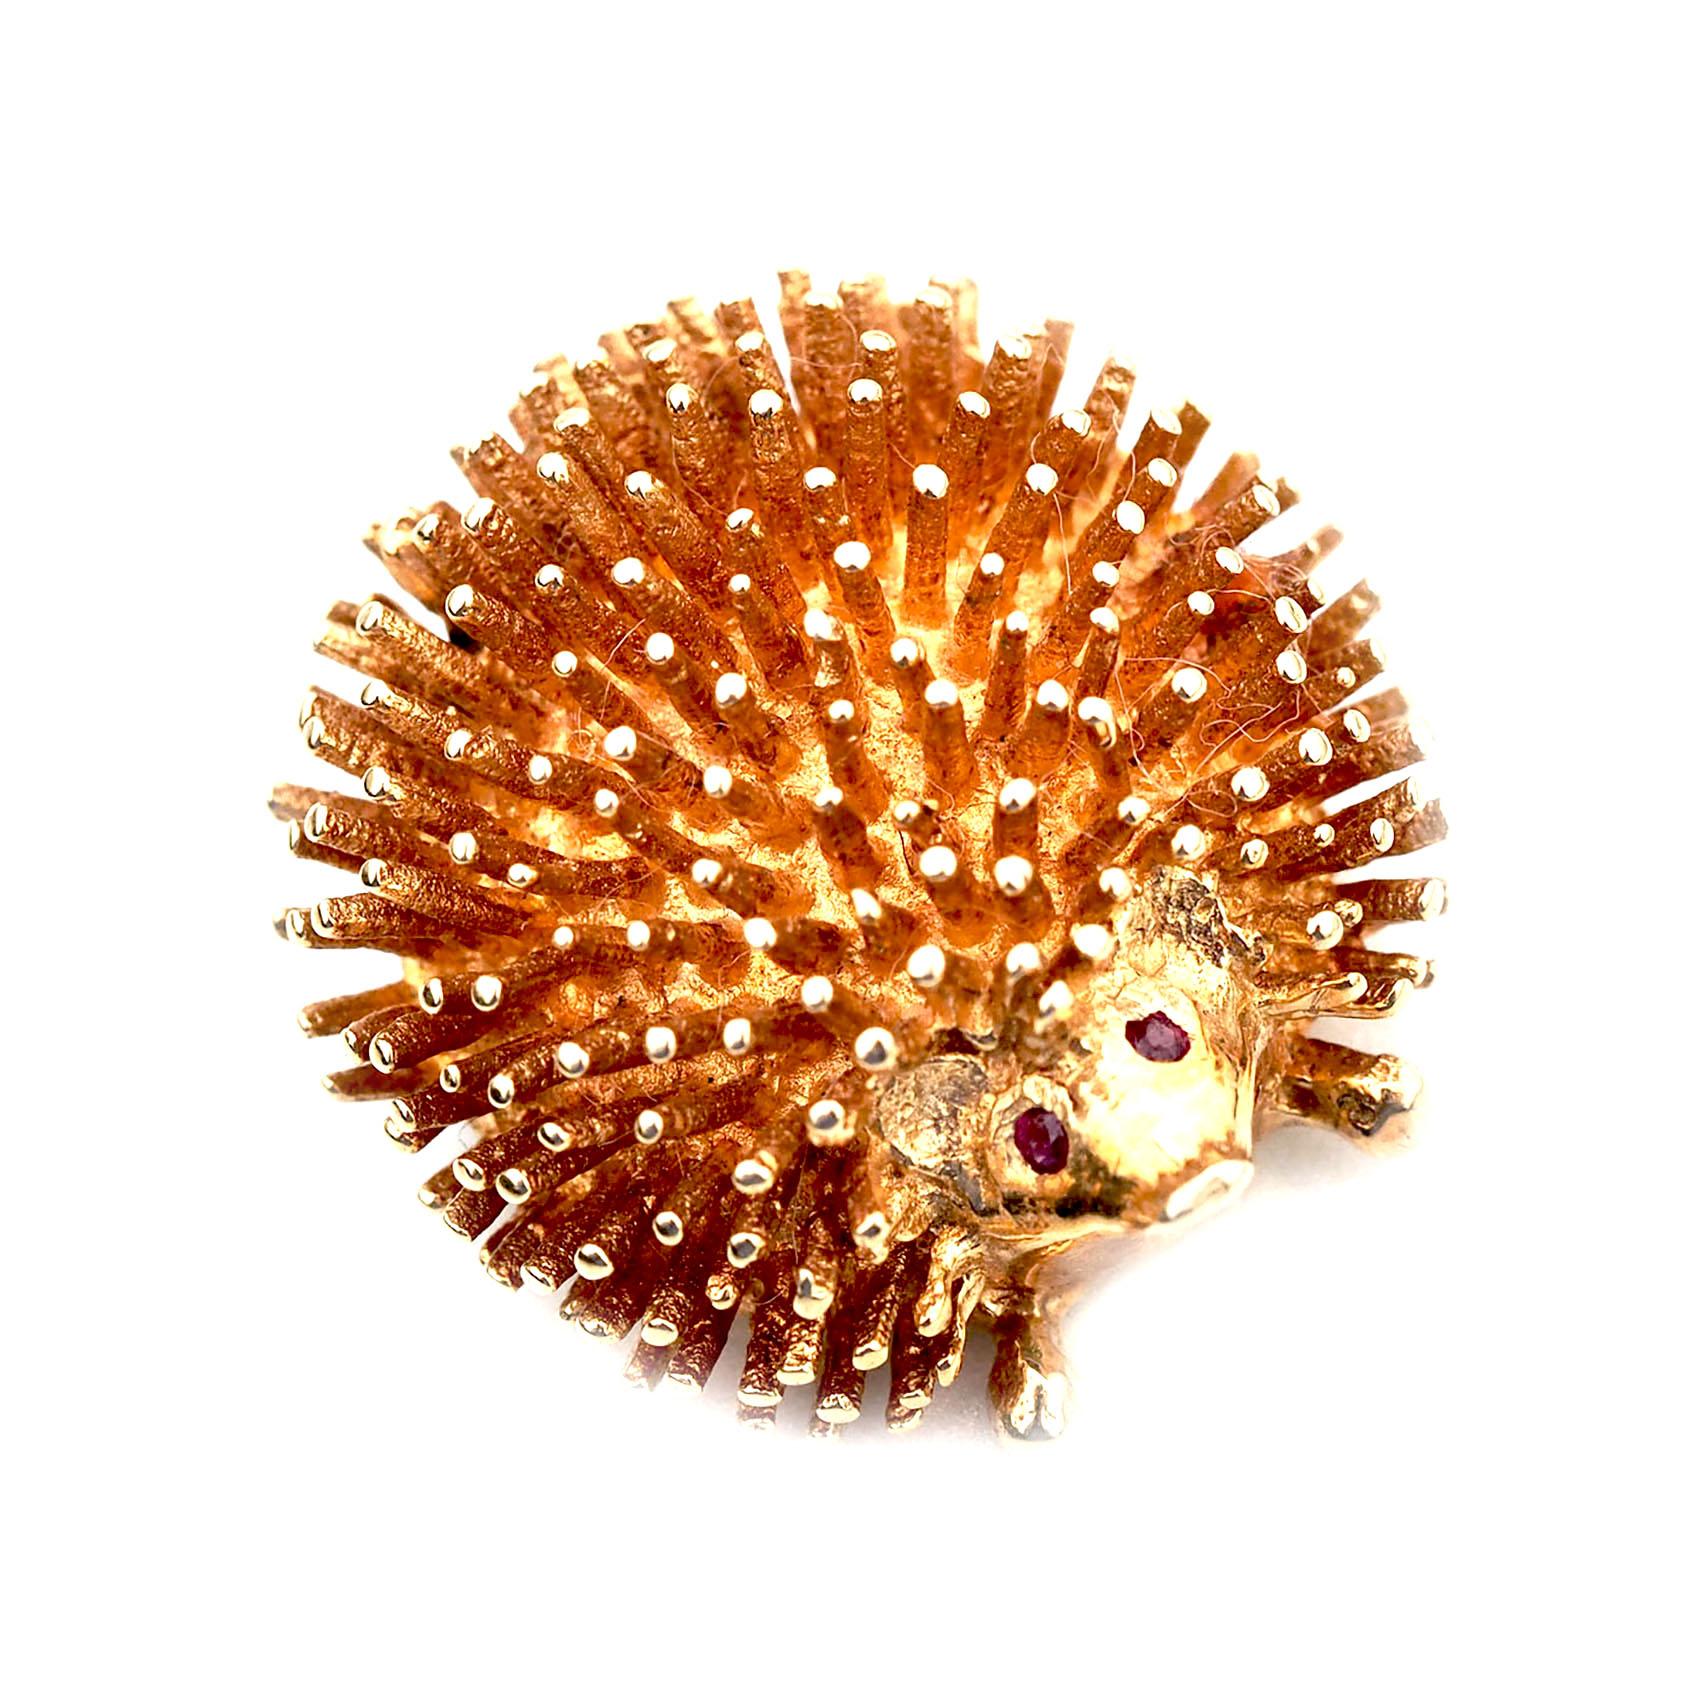 Please see this 14k Yellow Gold Hedgehog Pin. I have shot images from various angles so you can see it completely (both front and back). This piece weighs 10.0 grams total. 